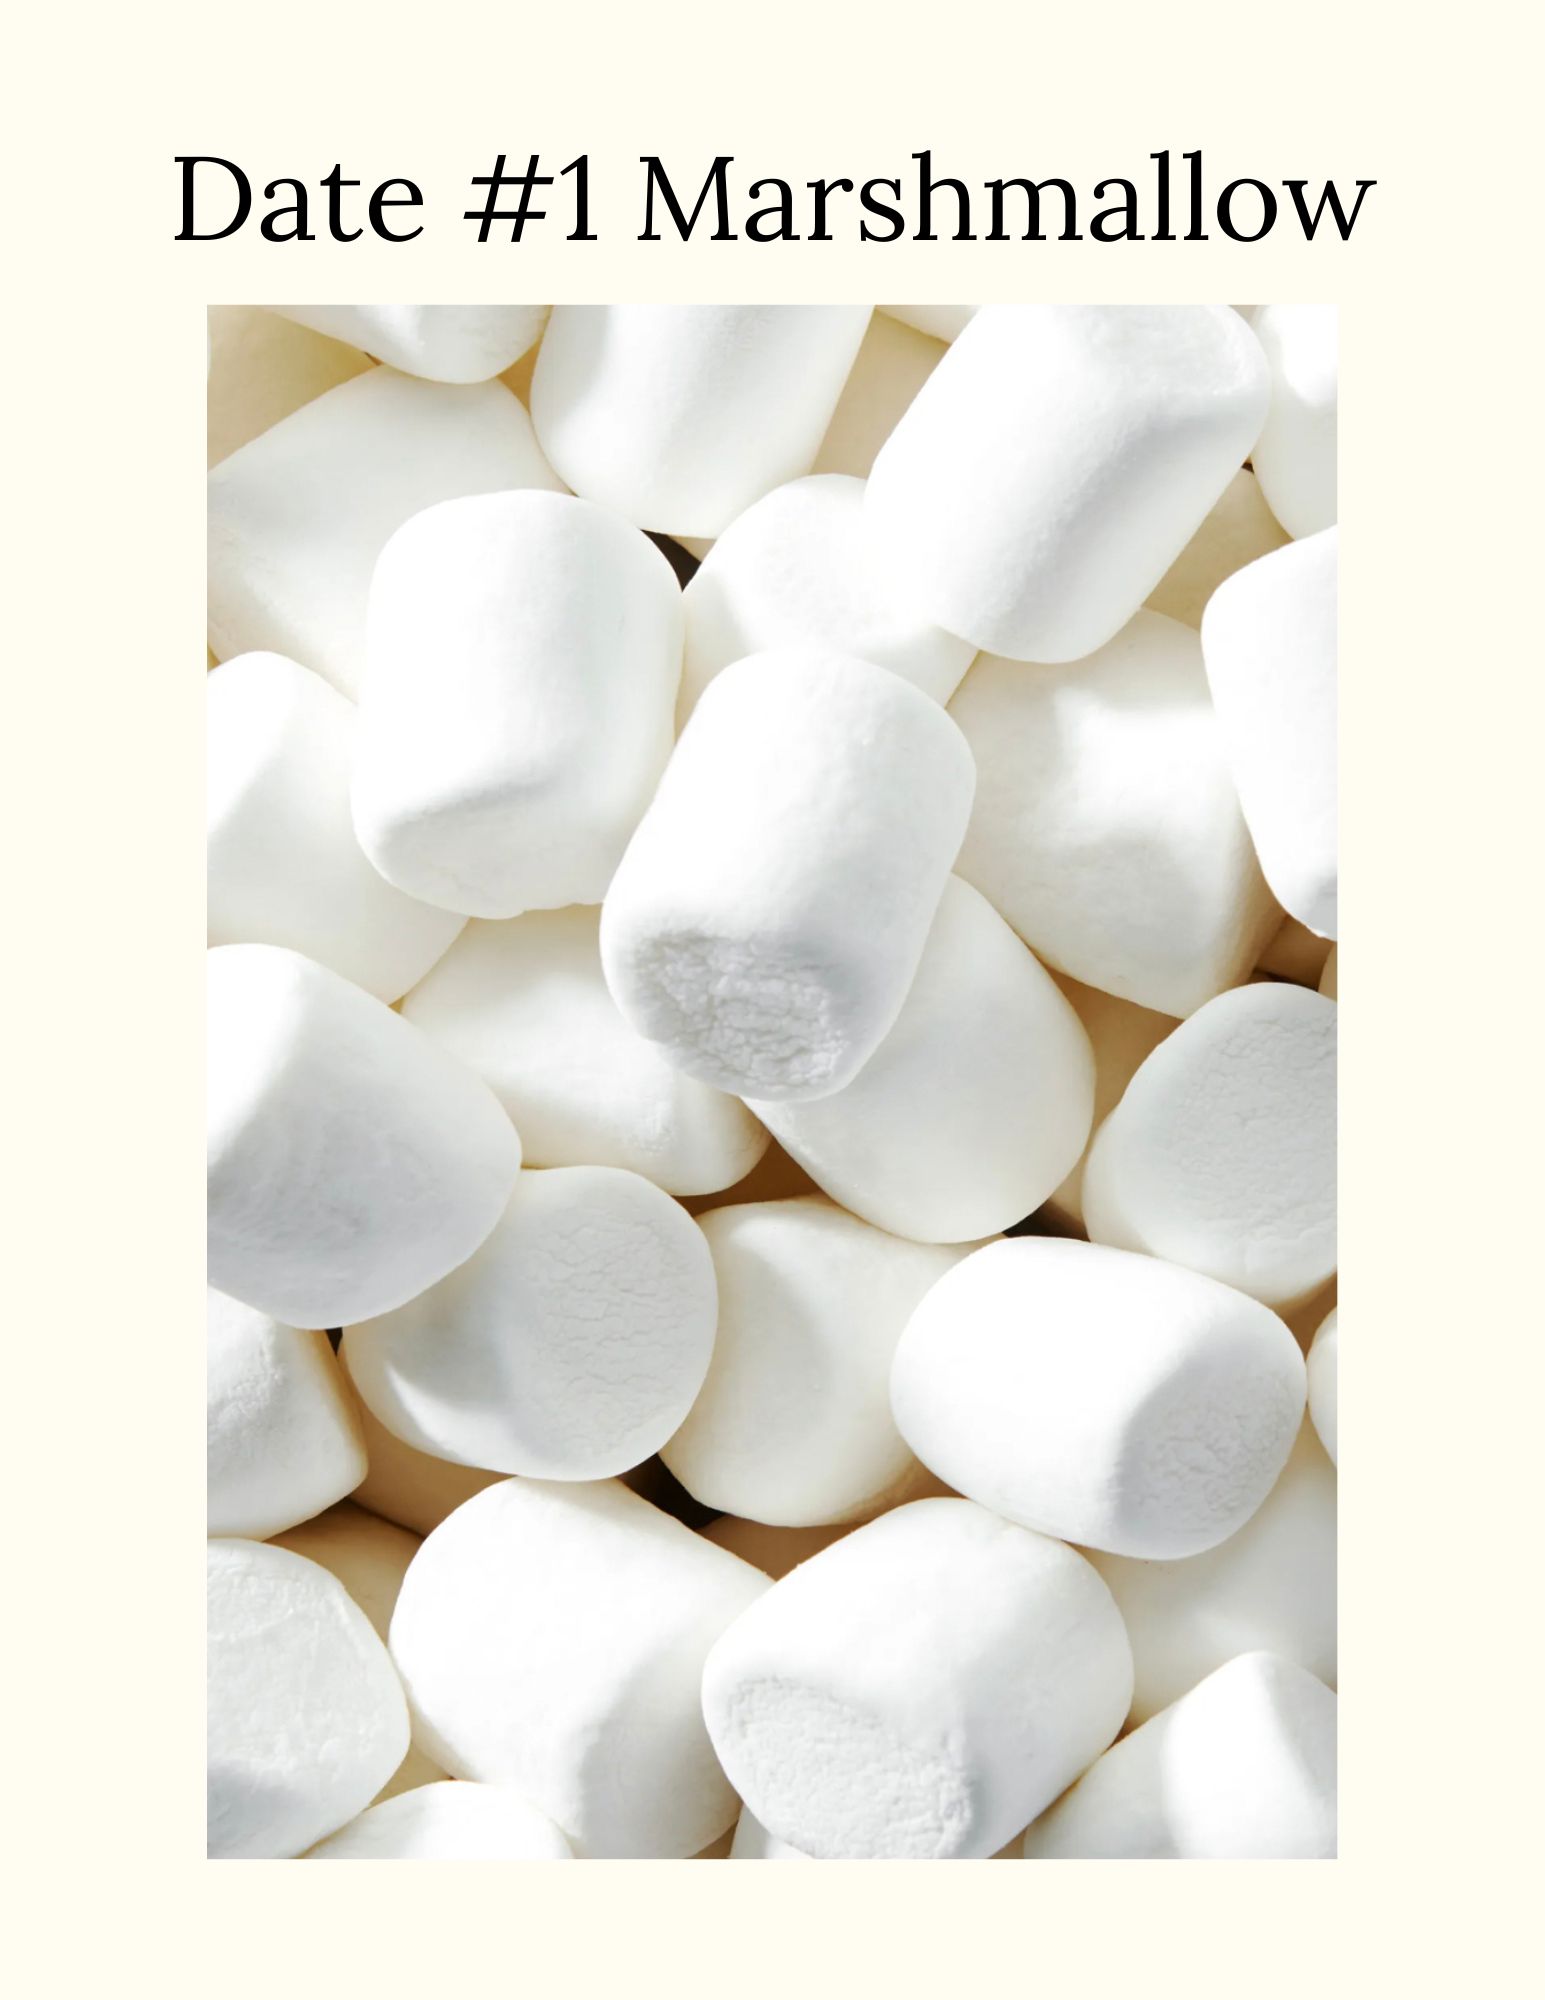 Protected: Date #1 Marshmallow